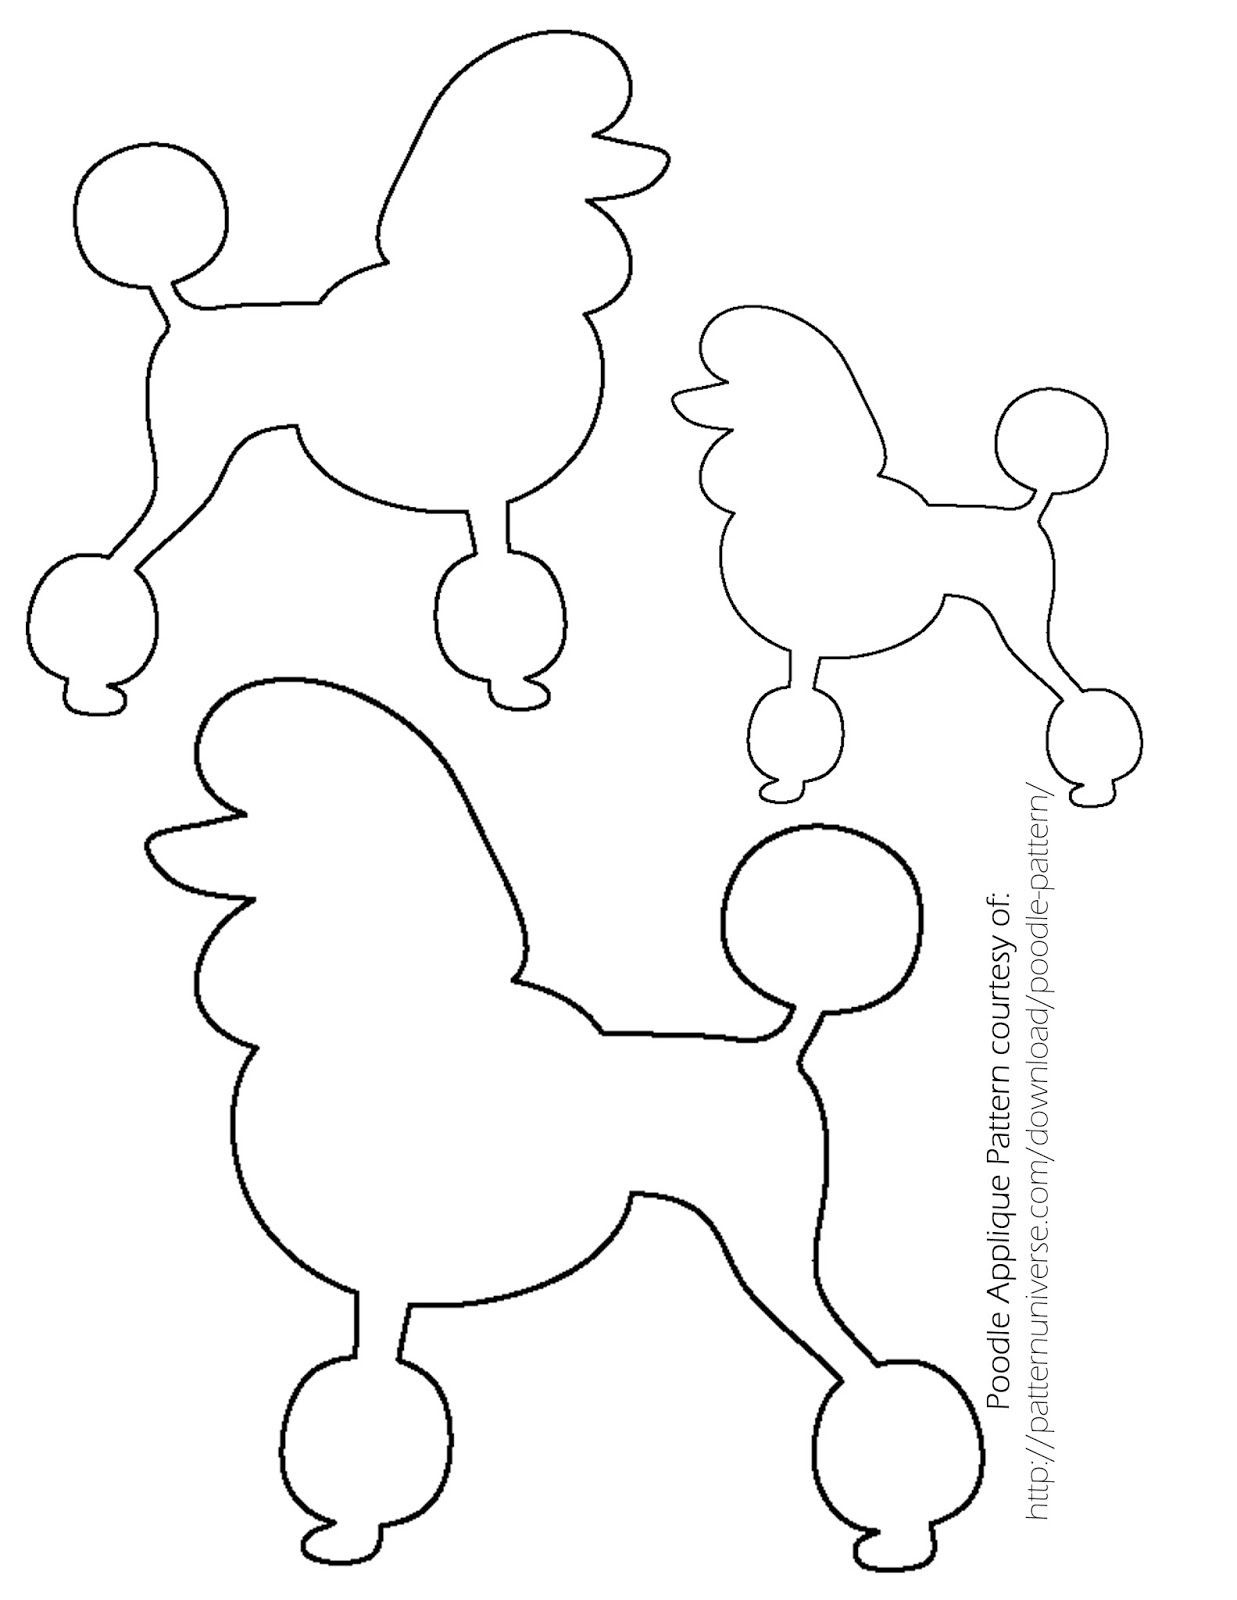 Poodle Outline Printable | Fiscalreform - Free Printable Poodle Template